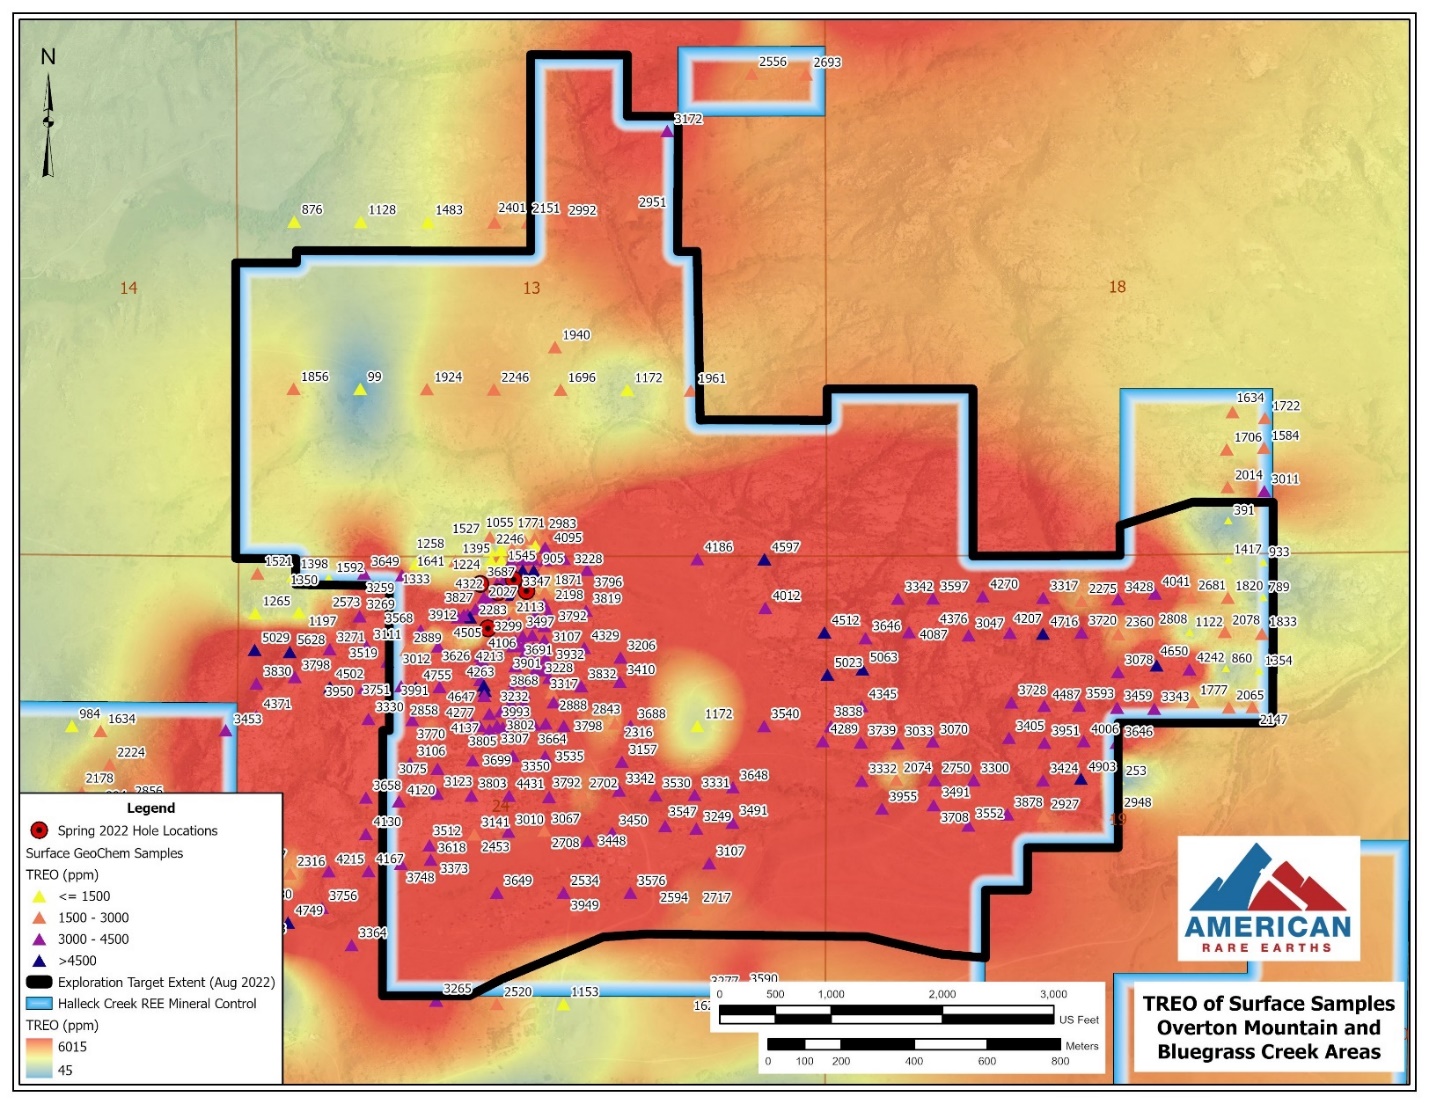 Overton Mountain and Bluegrass Creek Exploration Target Extent and TREO Distribution